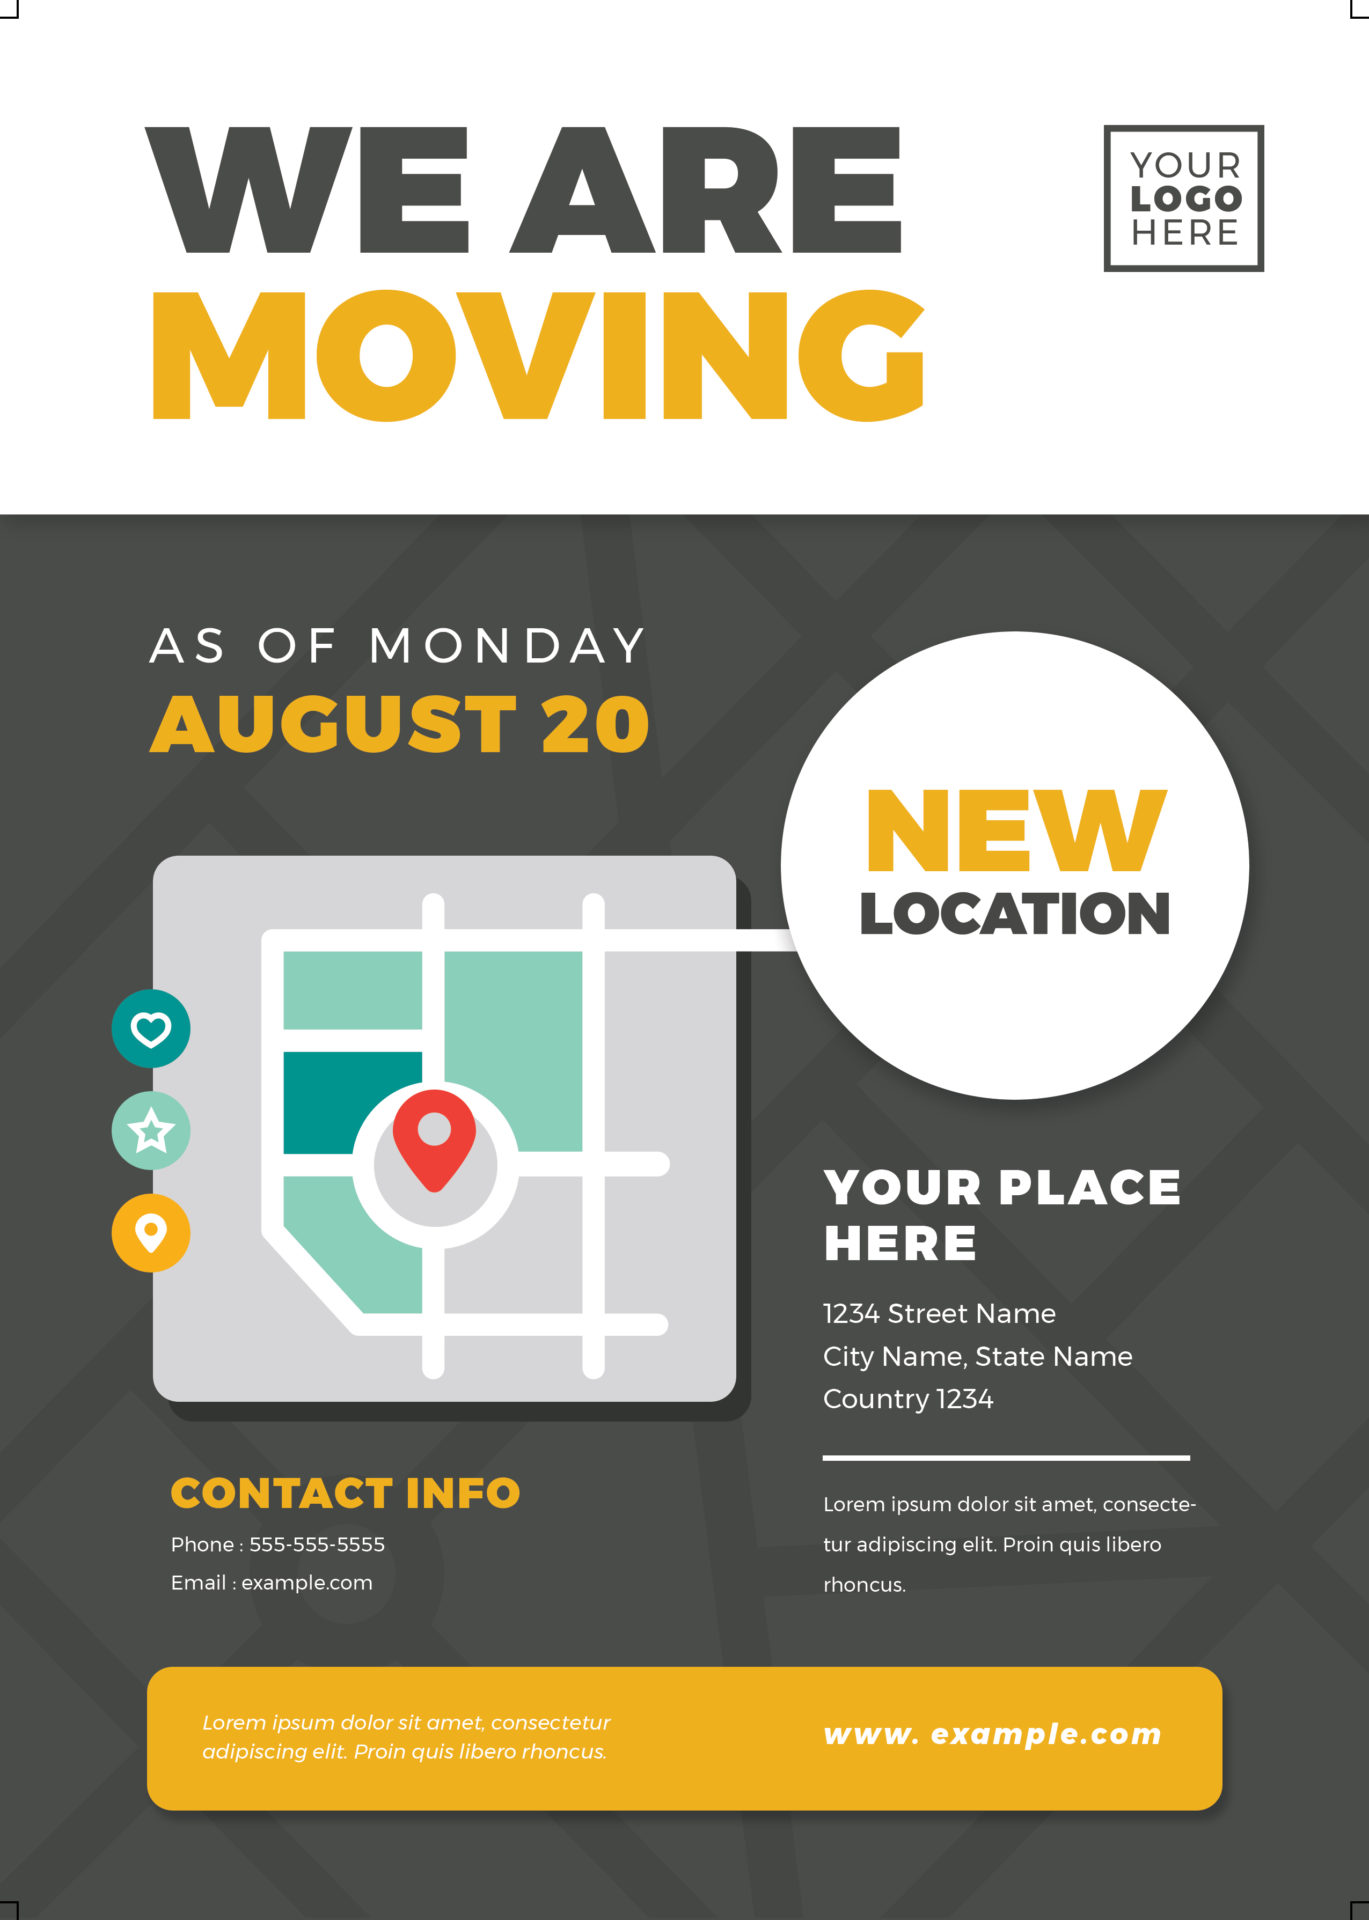 We-Are-Moving-Flyer-Templates-2